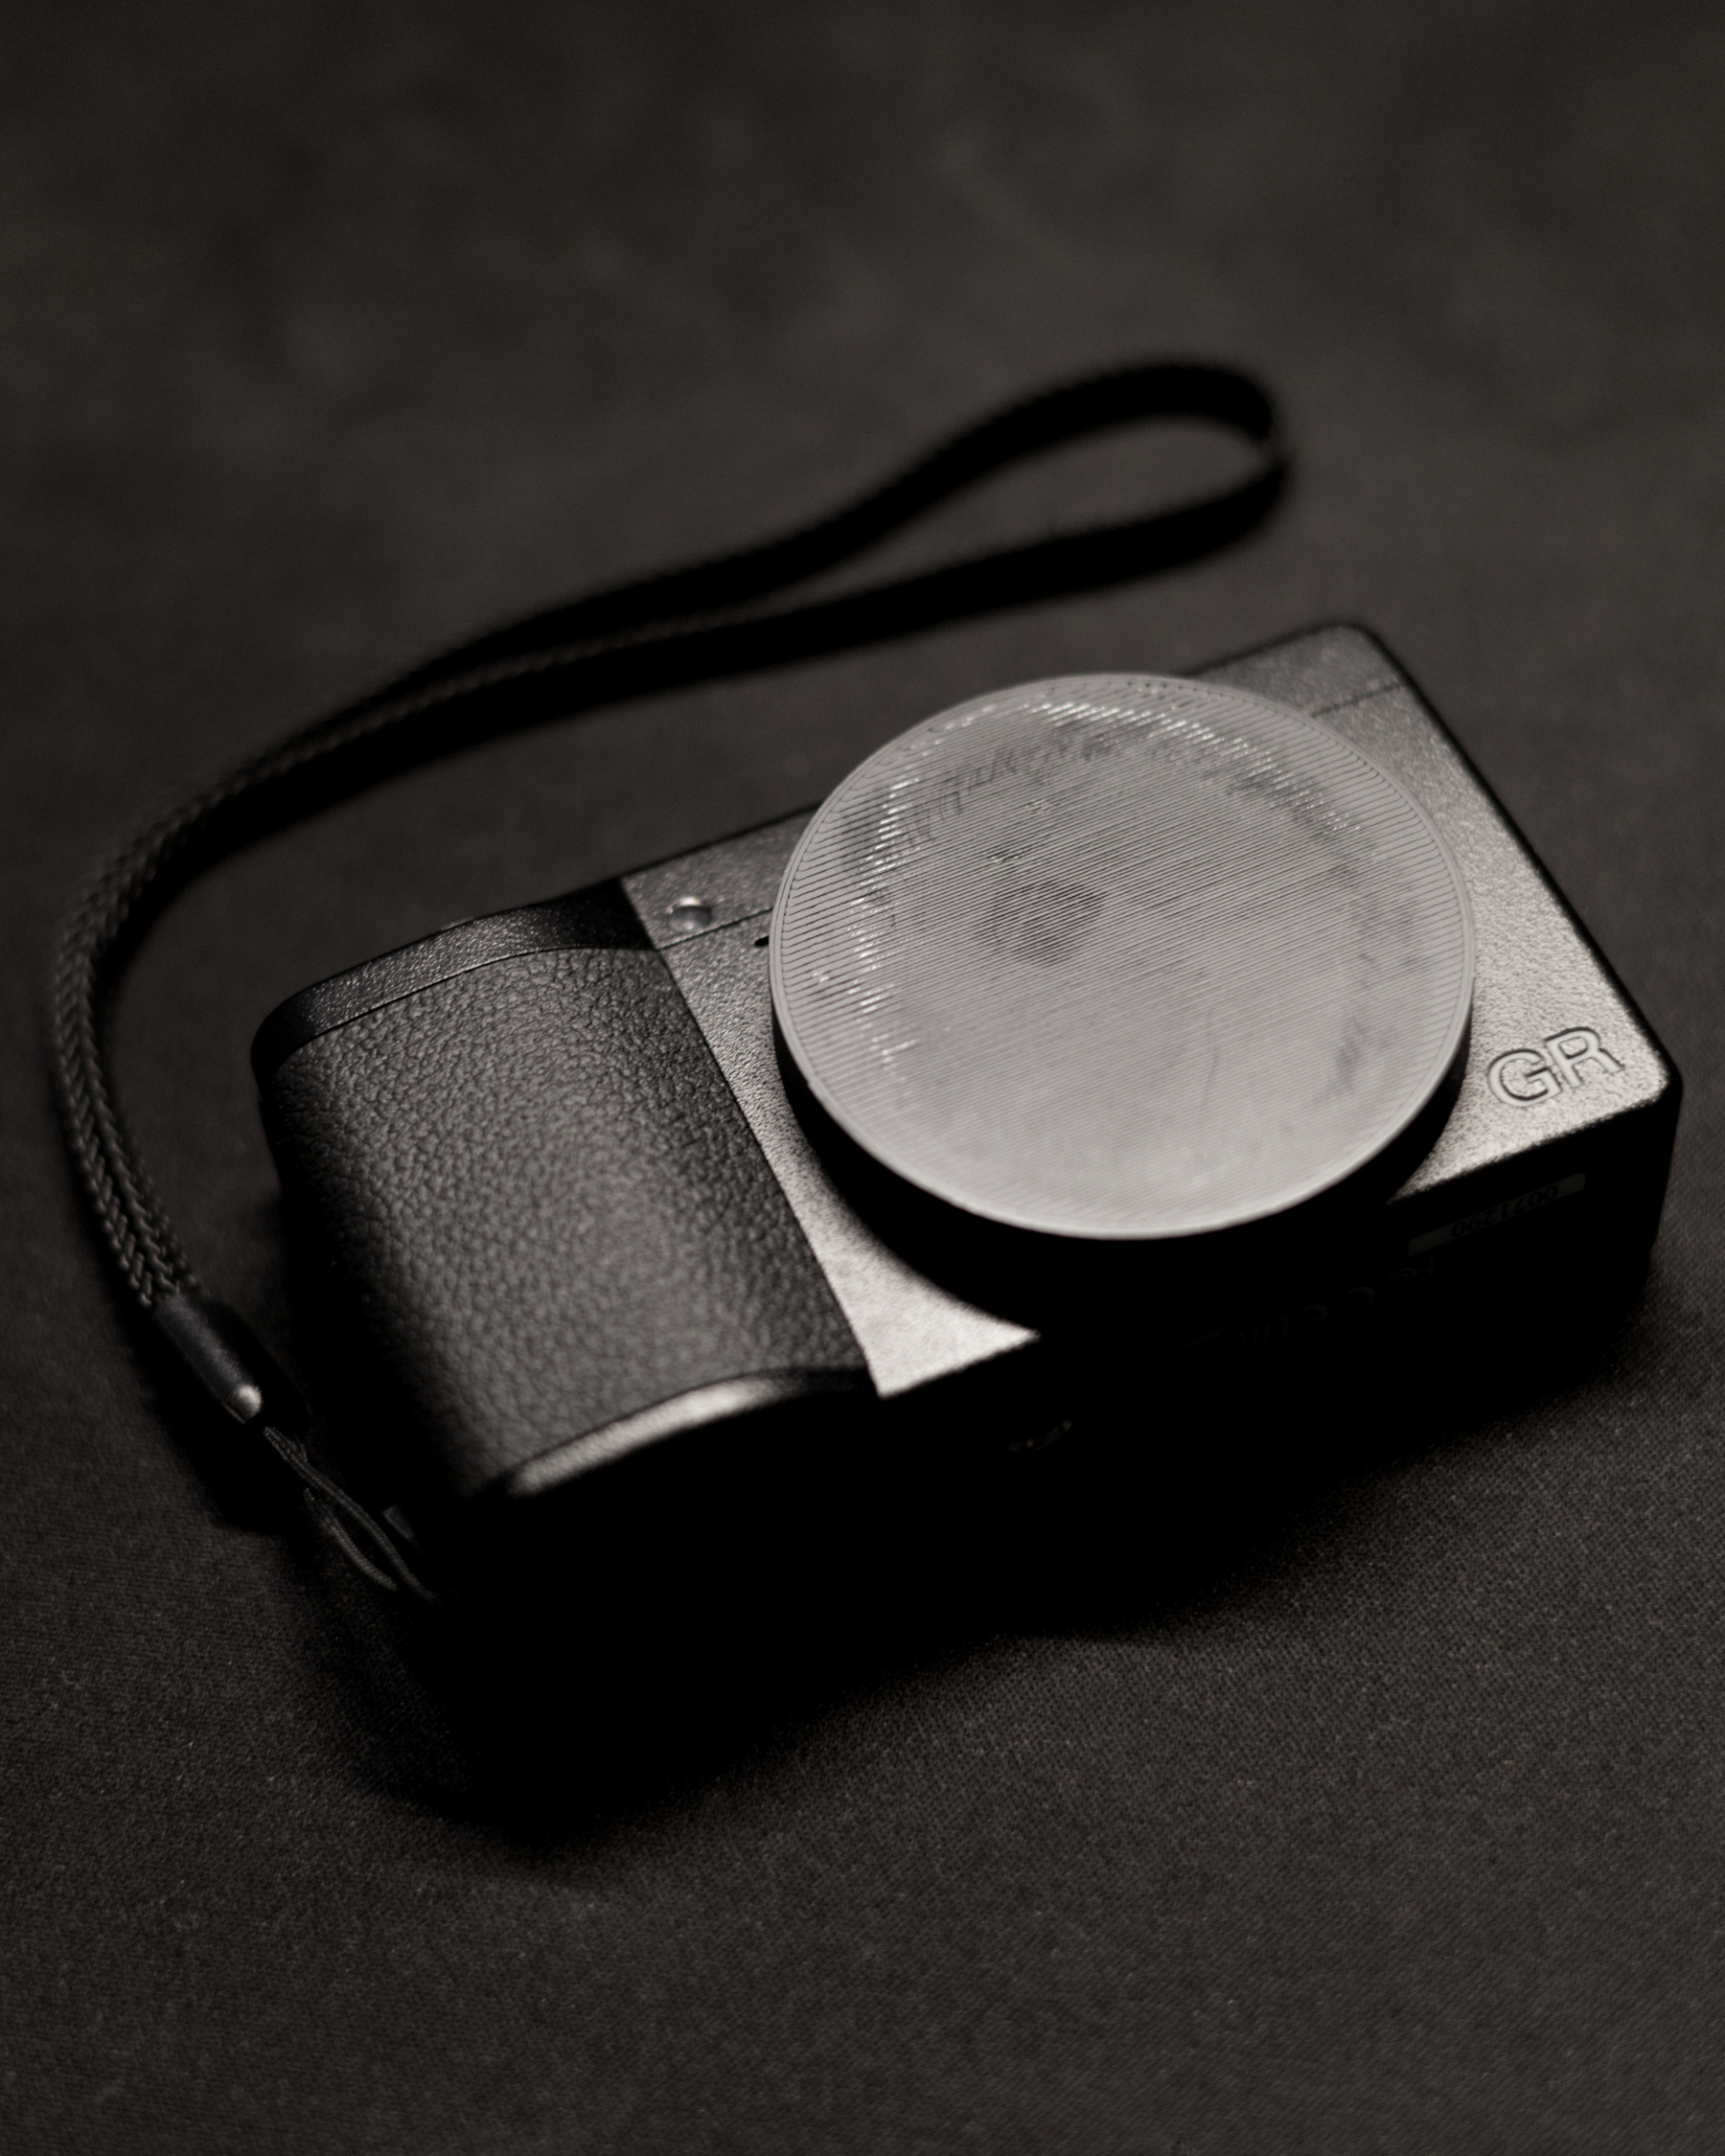 My Ricoh GR III with 3D printed Lens Cap installed